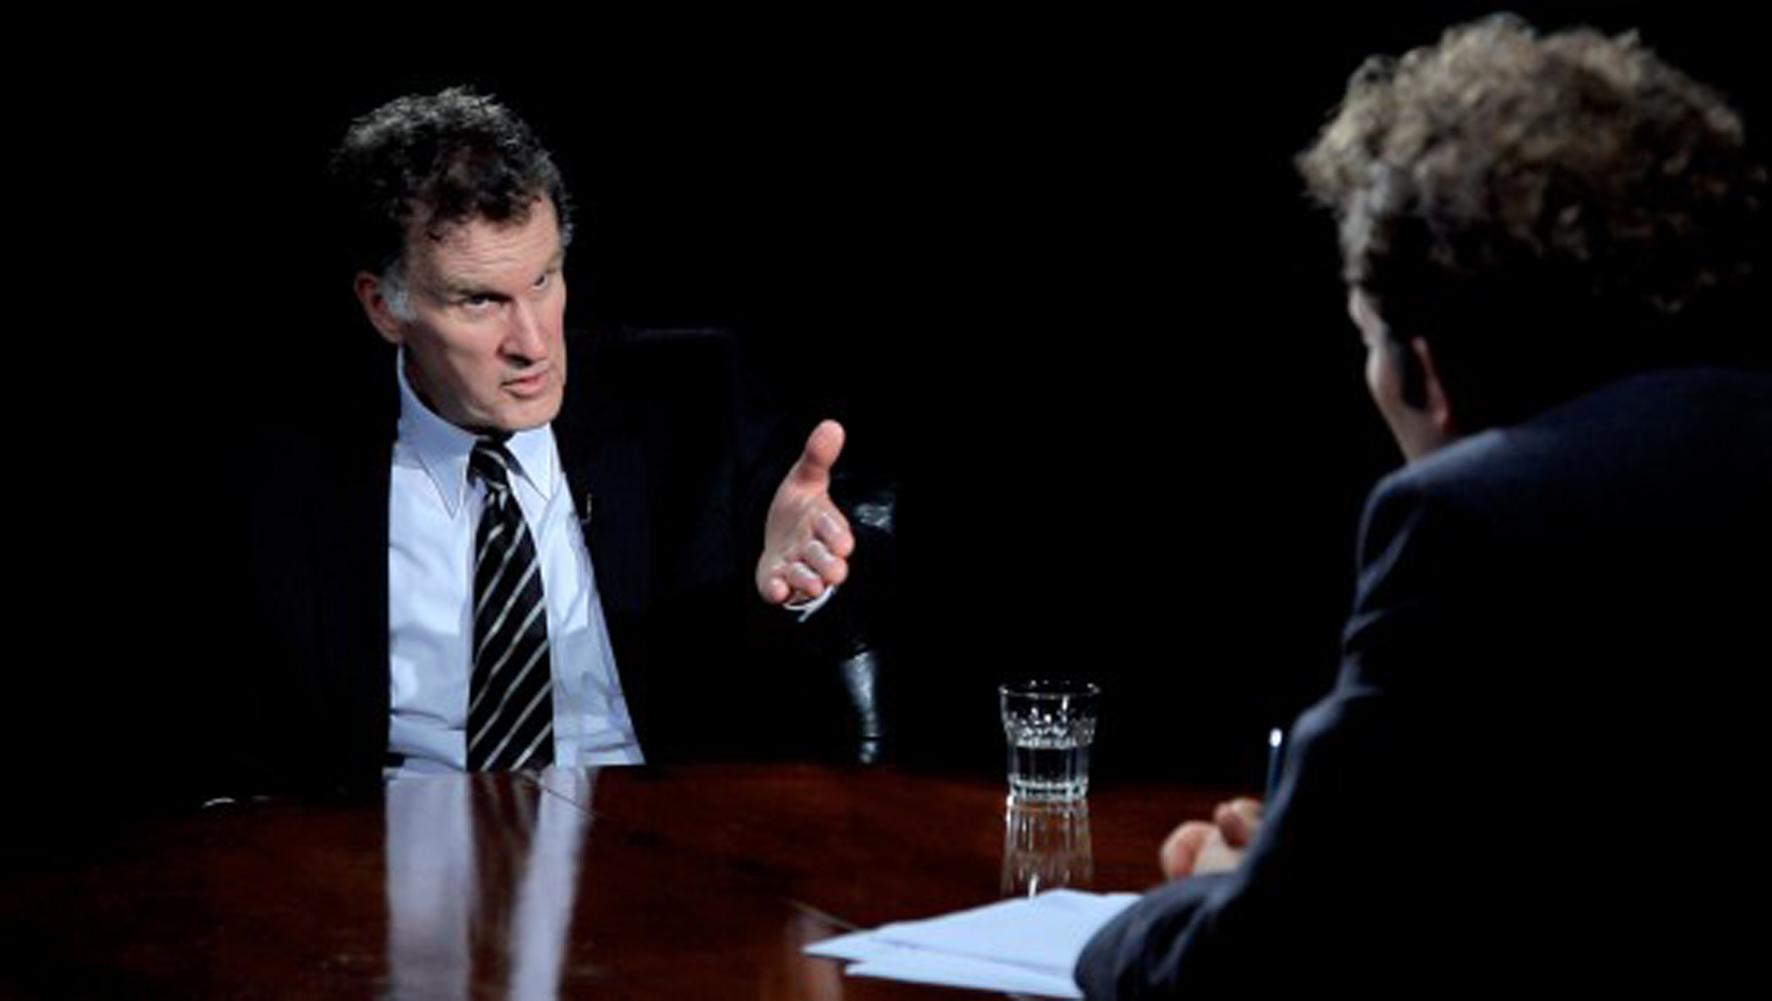 Two actors sitting at a table staging an interview between a banker and a host. A video still from a work by Jan Peter Hammer